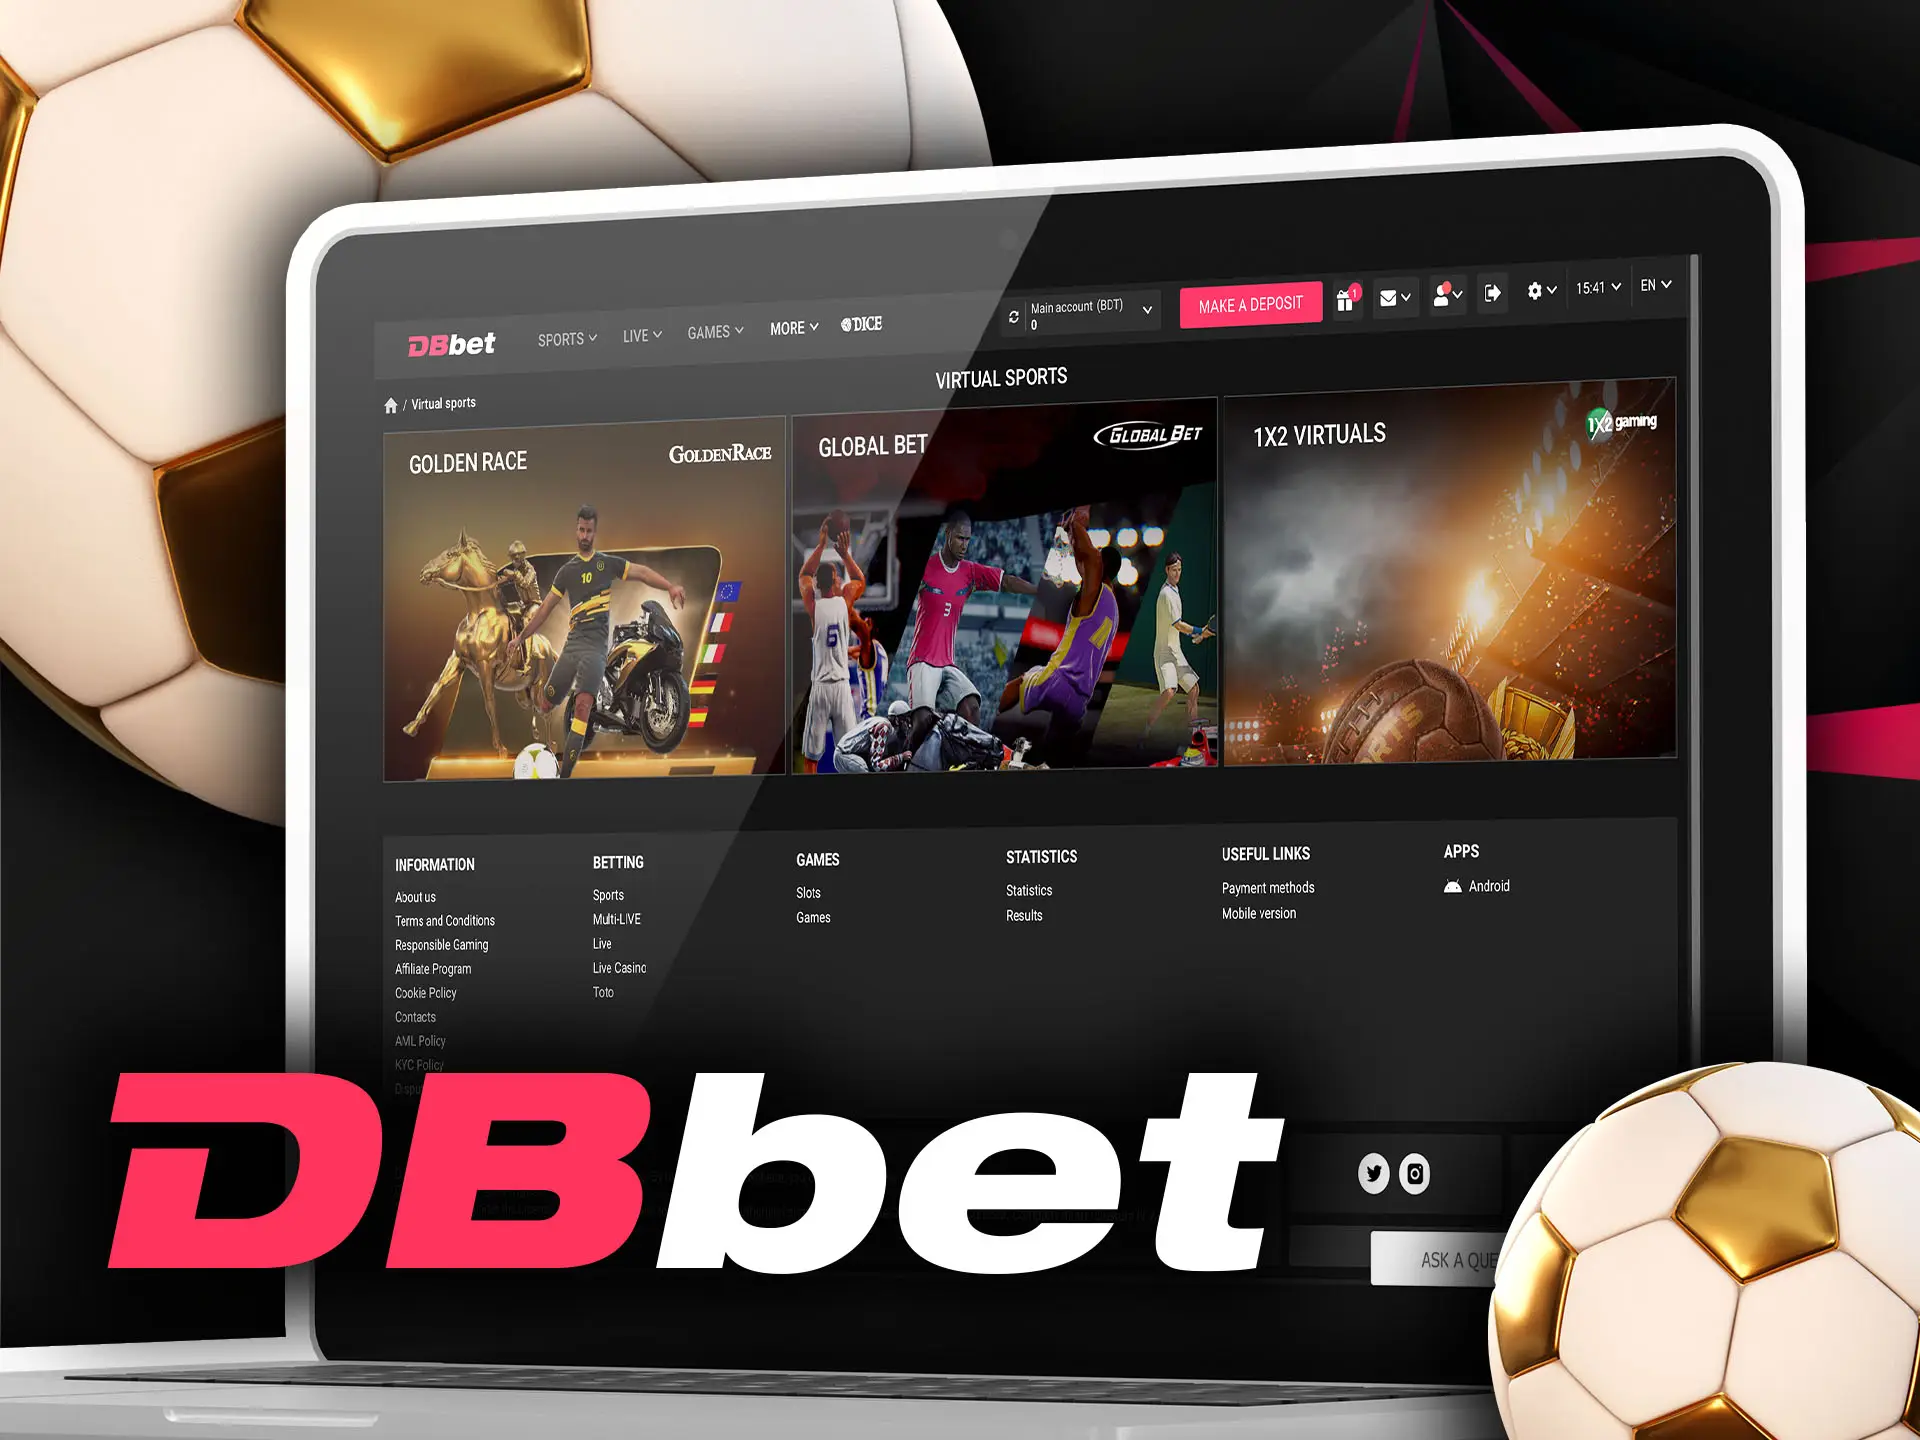 You can also place bets on virtual sports like football, horse racing and other.